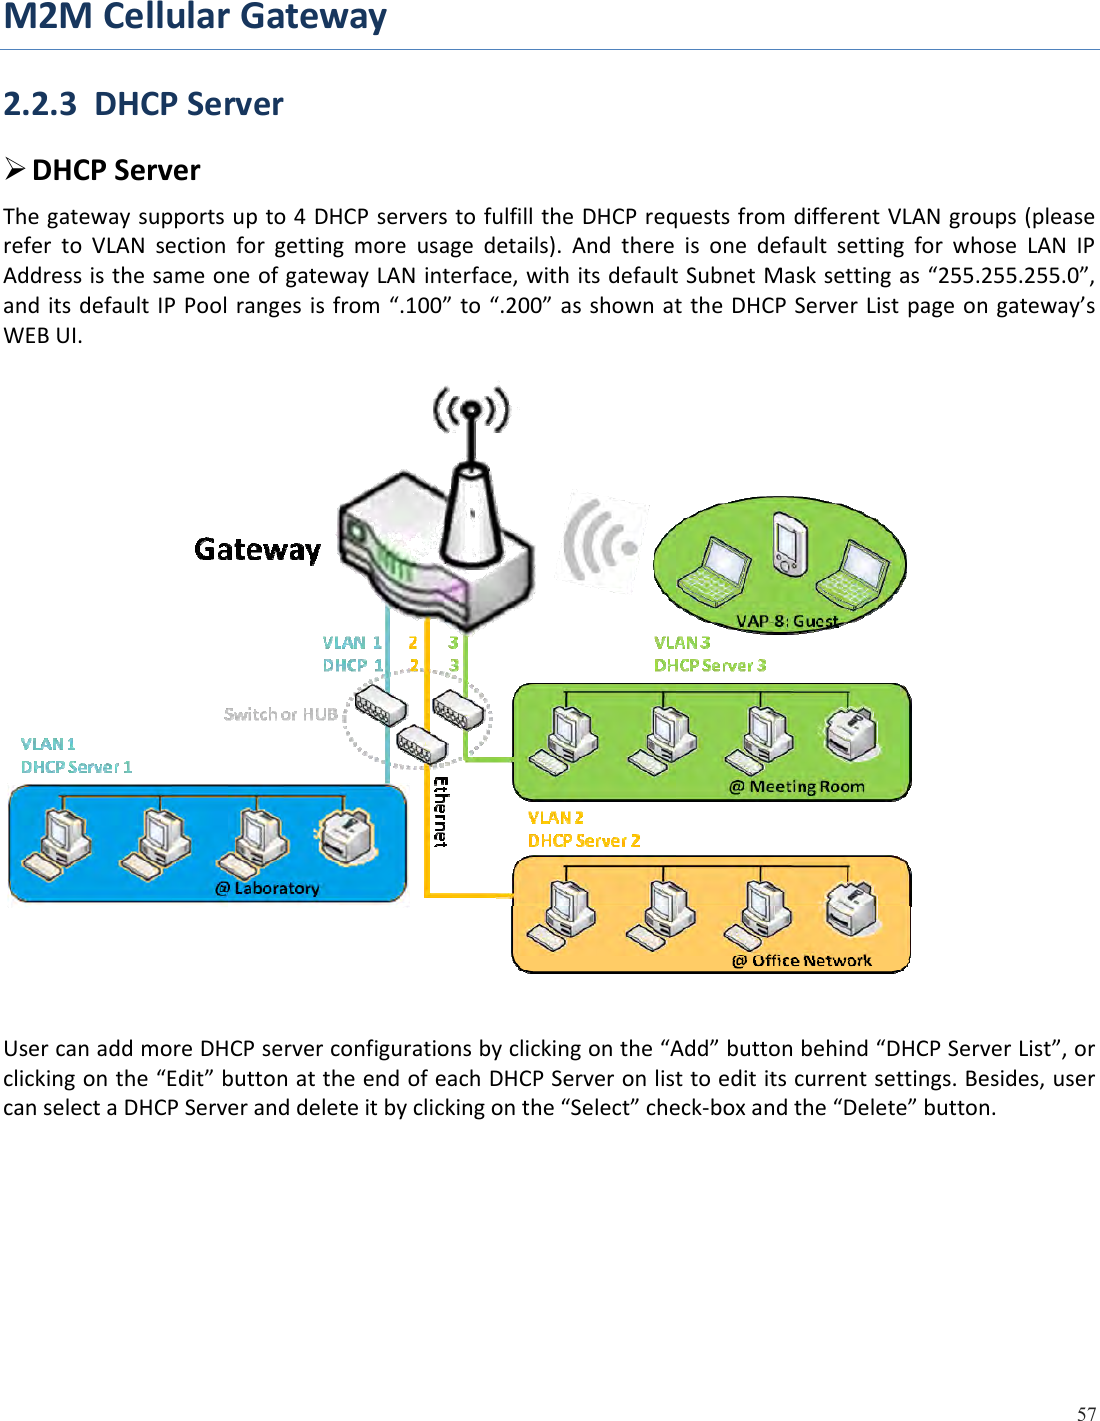 M2MCellularGateway 57  2.2.3DHCPServer DHCPServerThegatewaysupportsupto4DHCPserverstofulfilltheDHCPrequestsfromdifferentVLANgroups(pleaserefertoVLANsectionforgettingmoreusagedetails).AndthereisonedefaultsettingforwhoseLANIPAddressisthesameoneofgatewayLANinterface,withitsdefaultSubnetMasksettingas“255.255.255.0”,anditsdefaultIPPool rangesisfrom “.100”to“.200”asshown at the DHCP Server List page ongateway’sWEBUI.UsercanaddmoreDHCPserverconfigurationsbyclickingonthe“Add”buttonbehind“DHCPServerList”,orclickingonthe“Edit”buttonattheendofeachDHCPServeronlisttoedititscurrentsettings.Besides,usercanselectaDHCPServeranddeleteitbyclickingonthe“Select”check‐boxandthe“Delete”button.